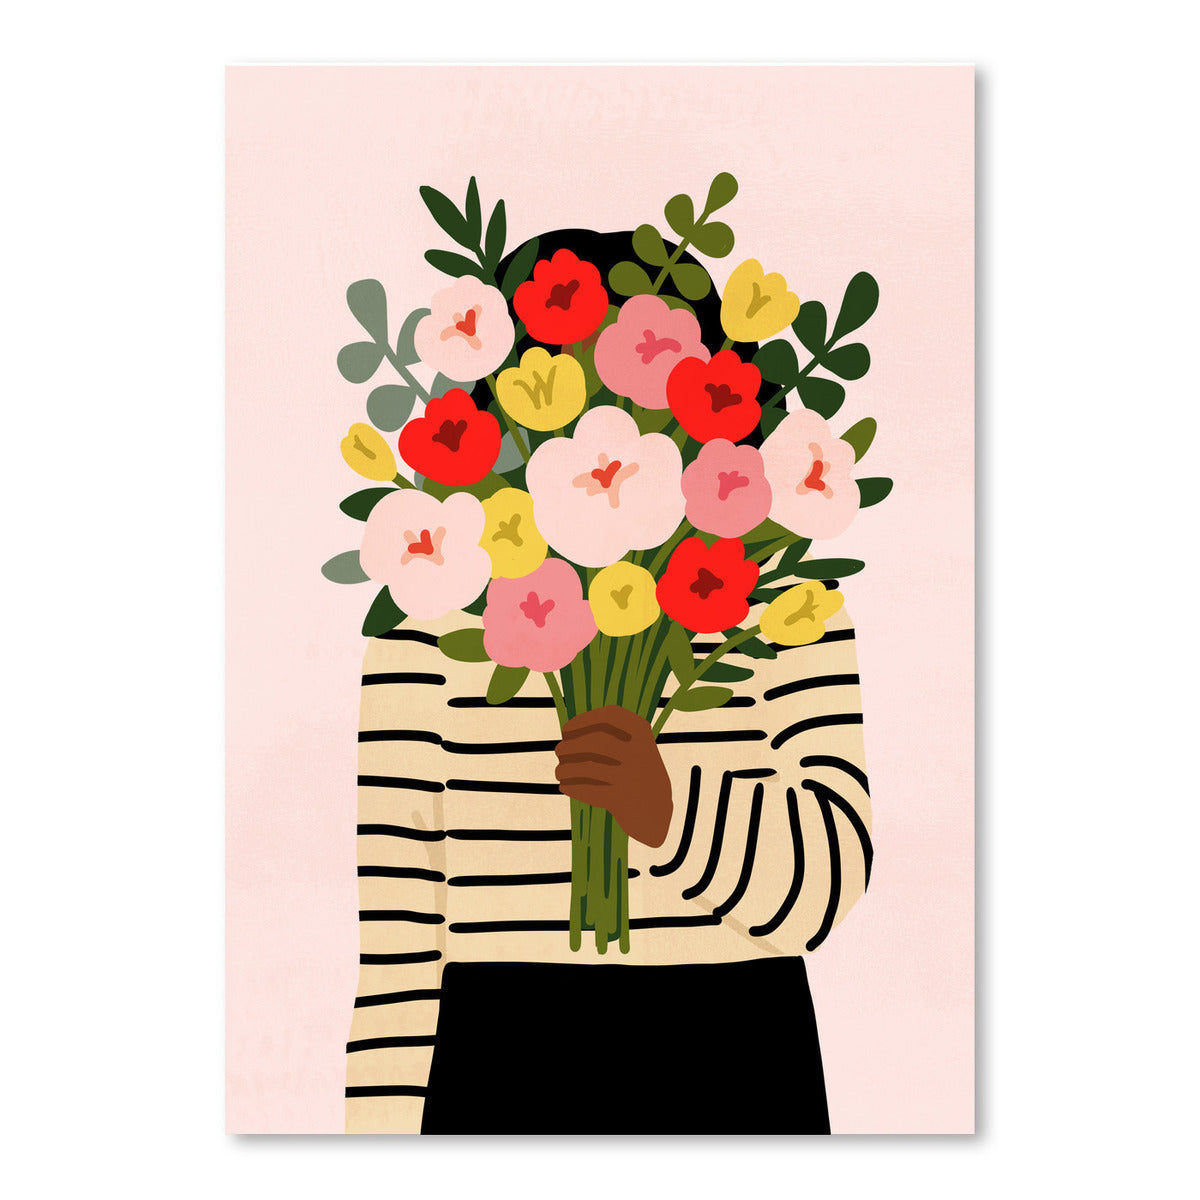 Darling Valentine I by Victoria Borges by World Art Group - Art Print - Americanflat